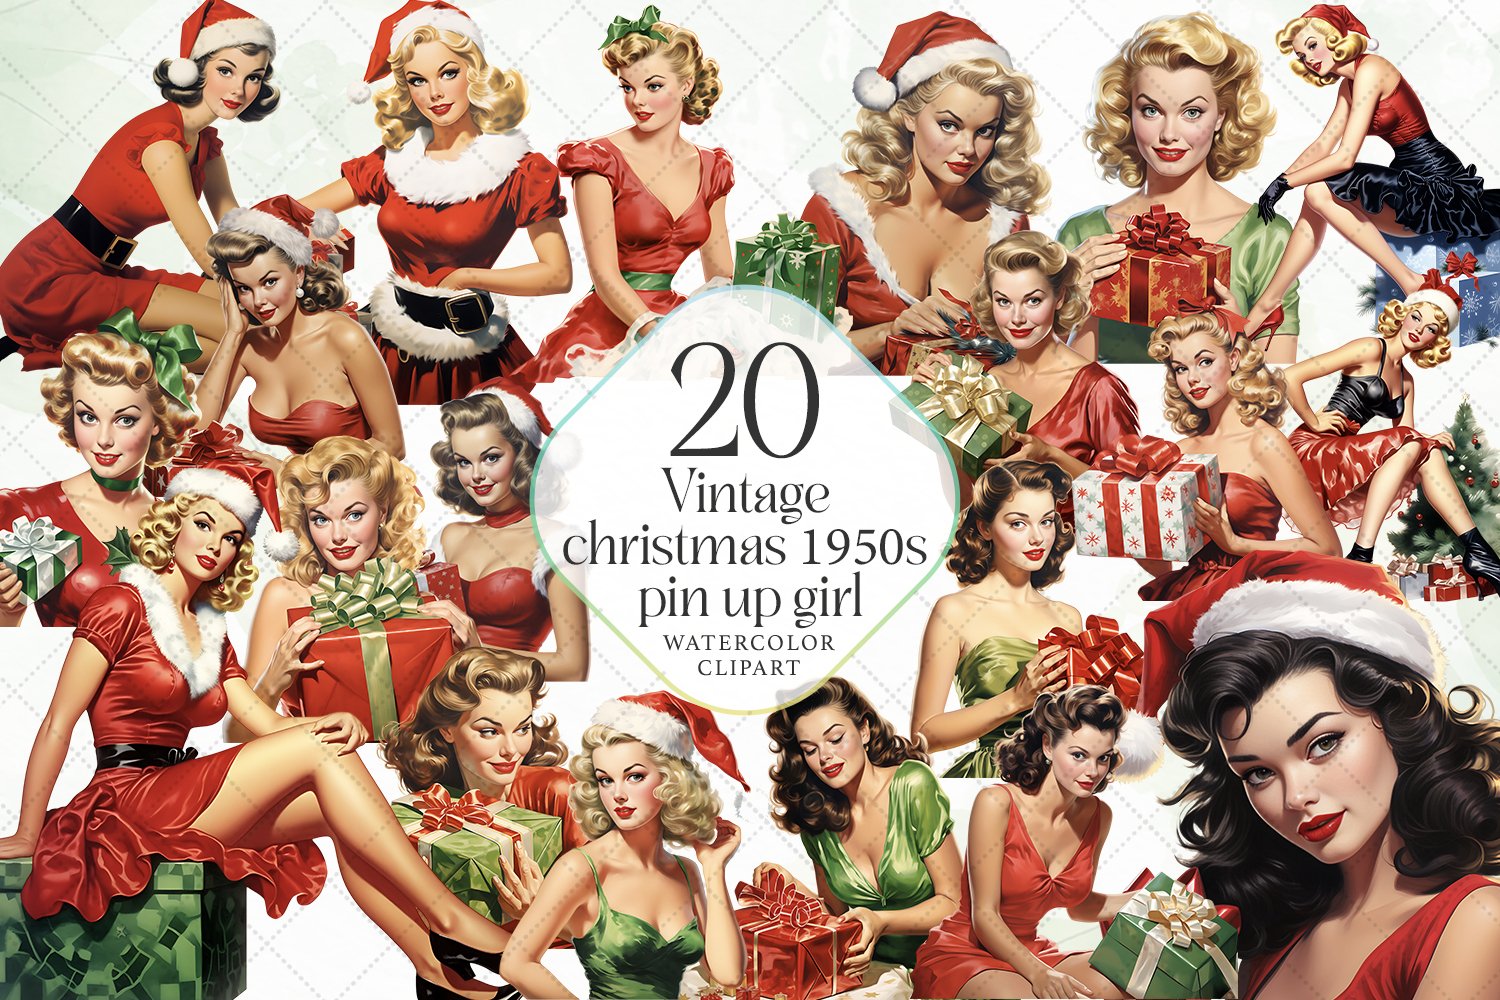 angel pitts share vintage christmas pin up girl images photos